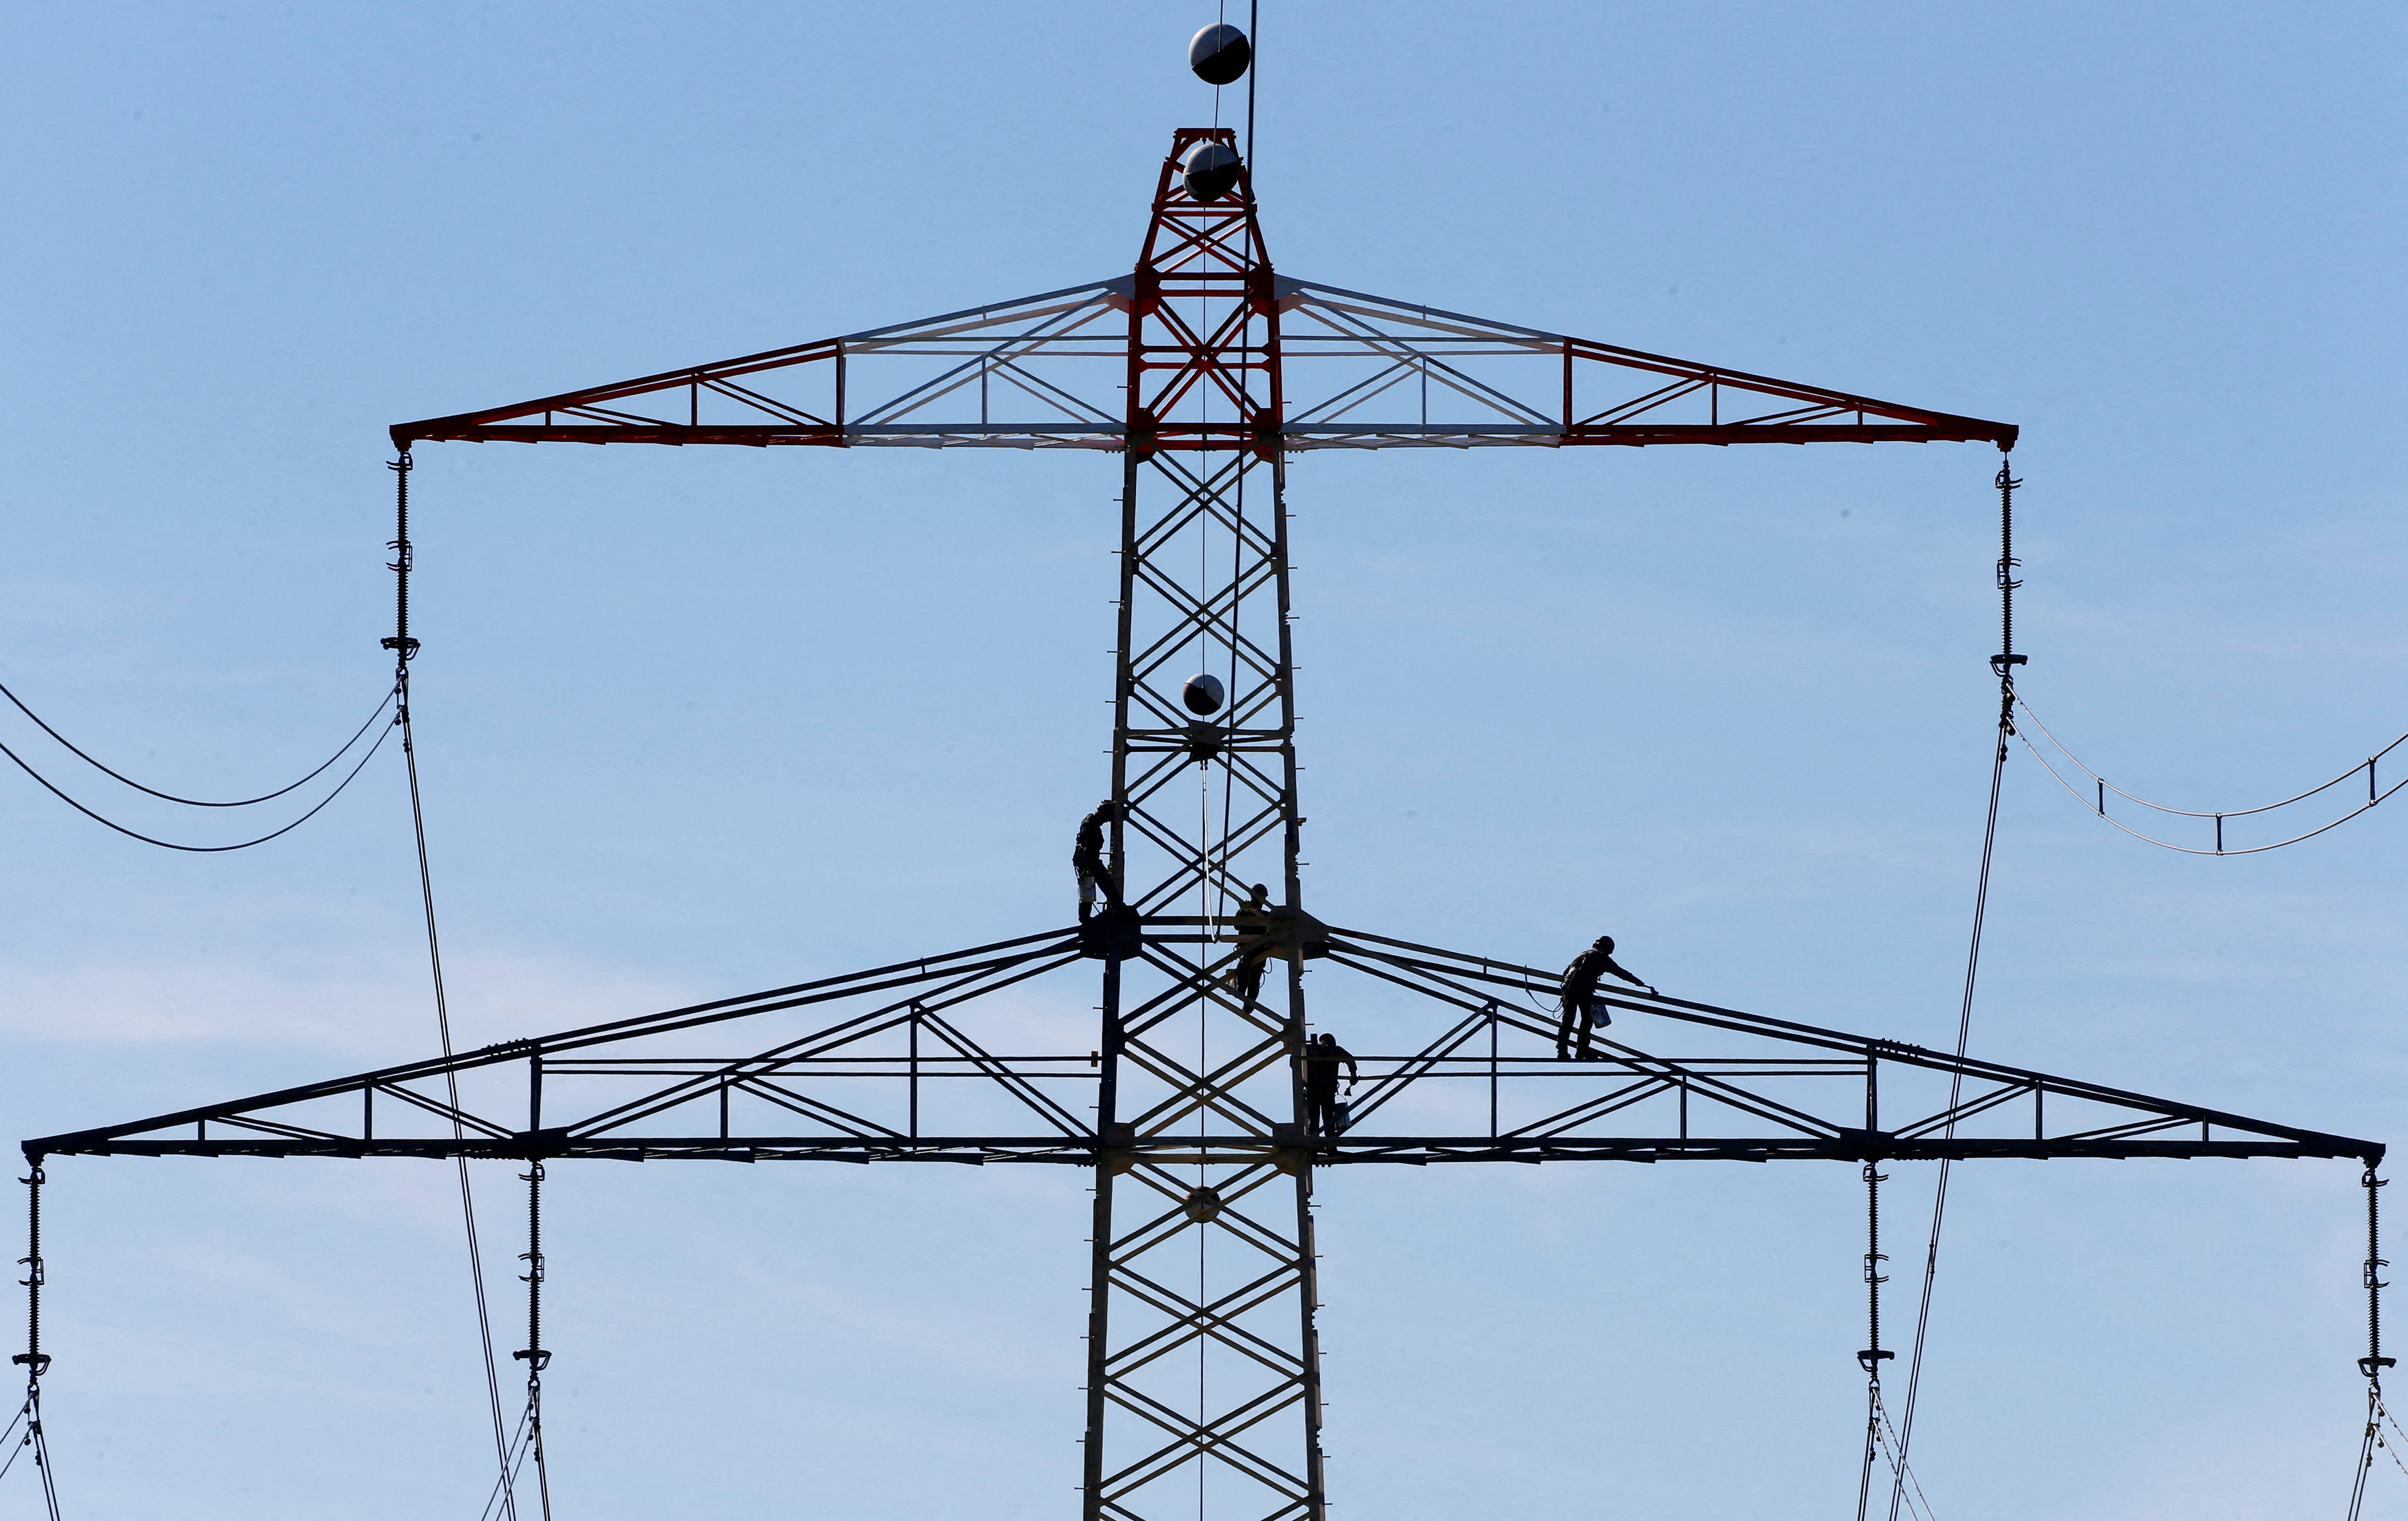 Workers renovate an electricity pylon near Gilching south of Munich